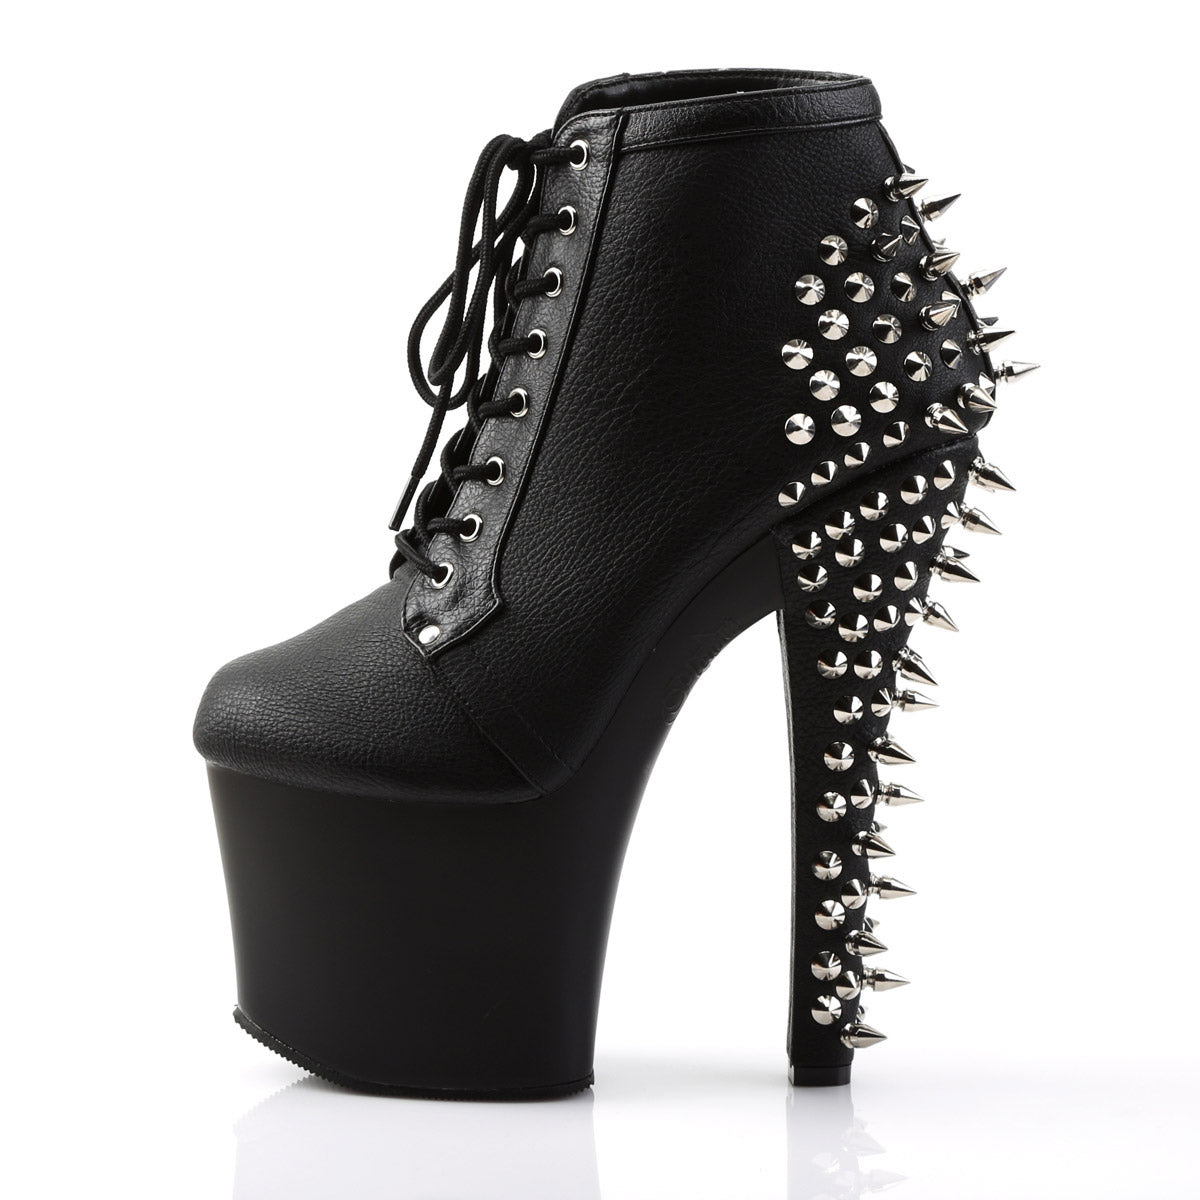 Vidura studded leather ankle boots in black - Christian Louboutin |  Mytheresa